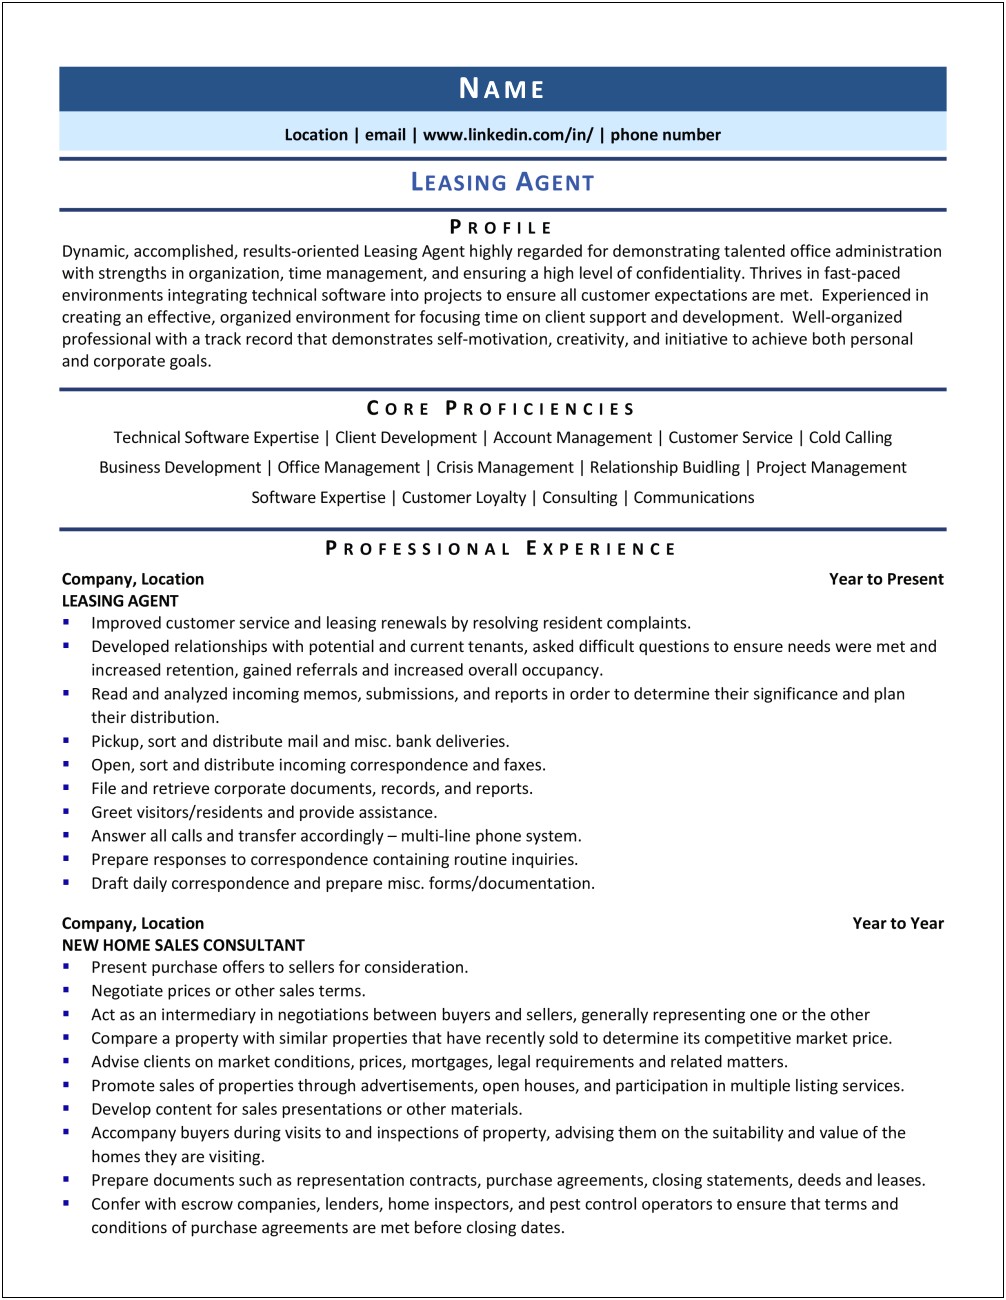 Sample Resume To Get A Leasing Manager Job